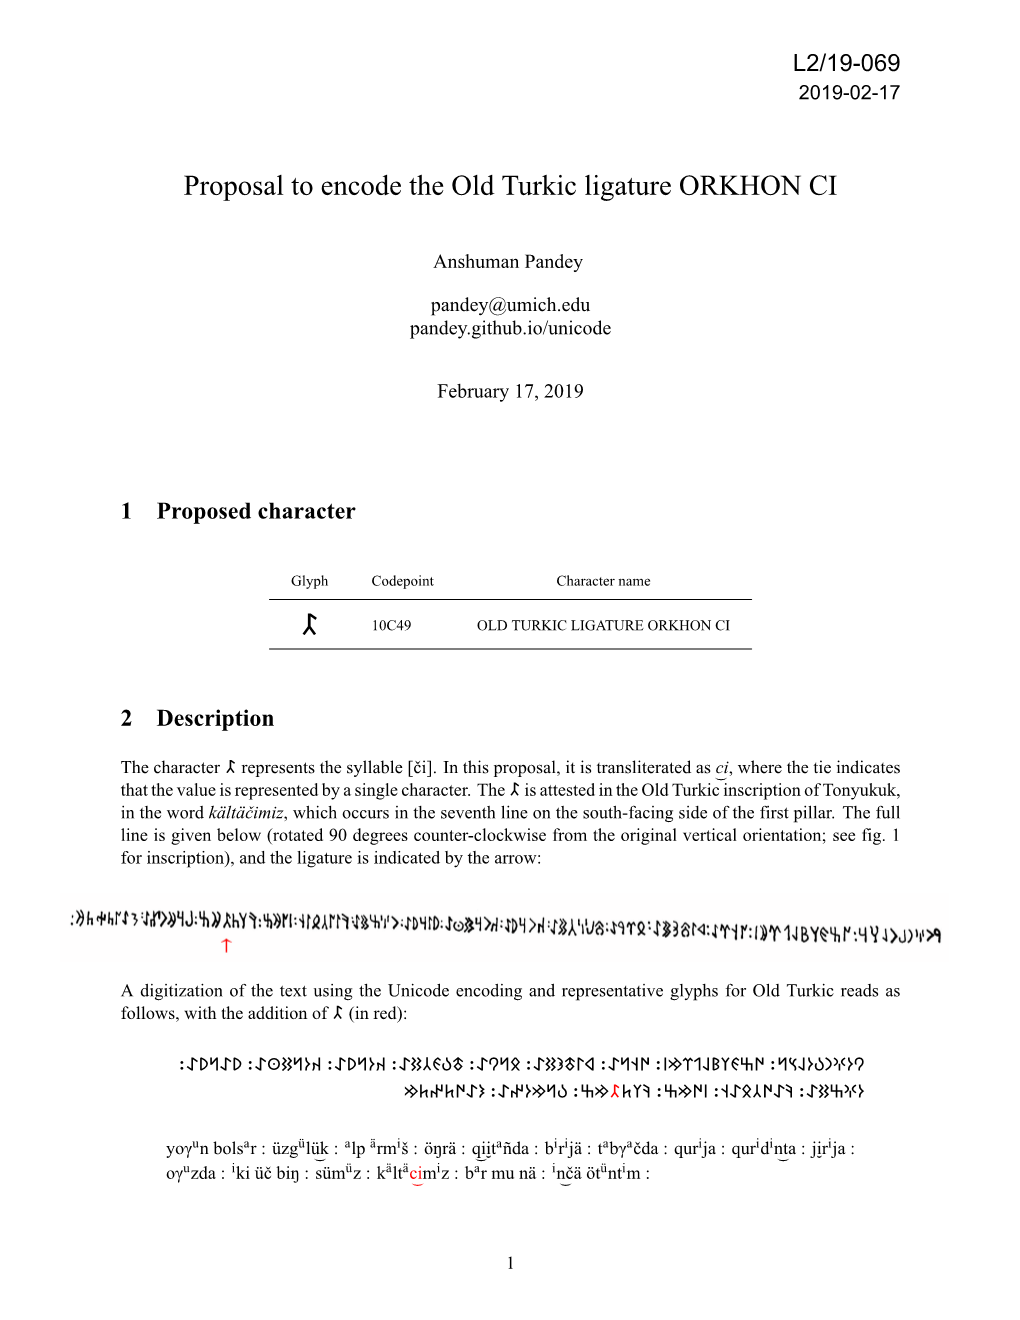 Proposal to Encode the Old Turkic Ligature ORKHON CI